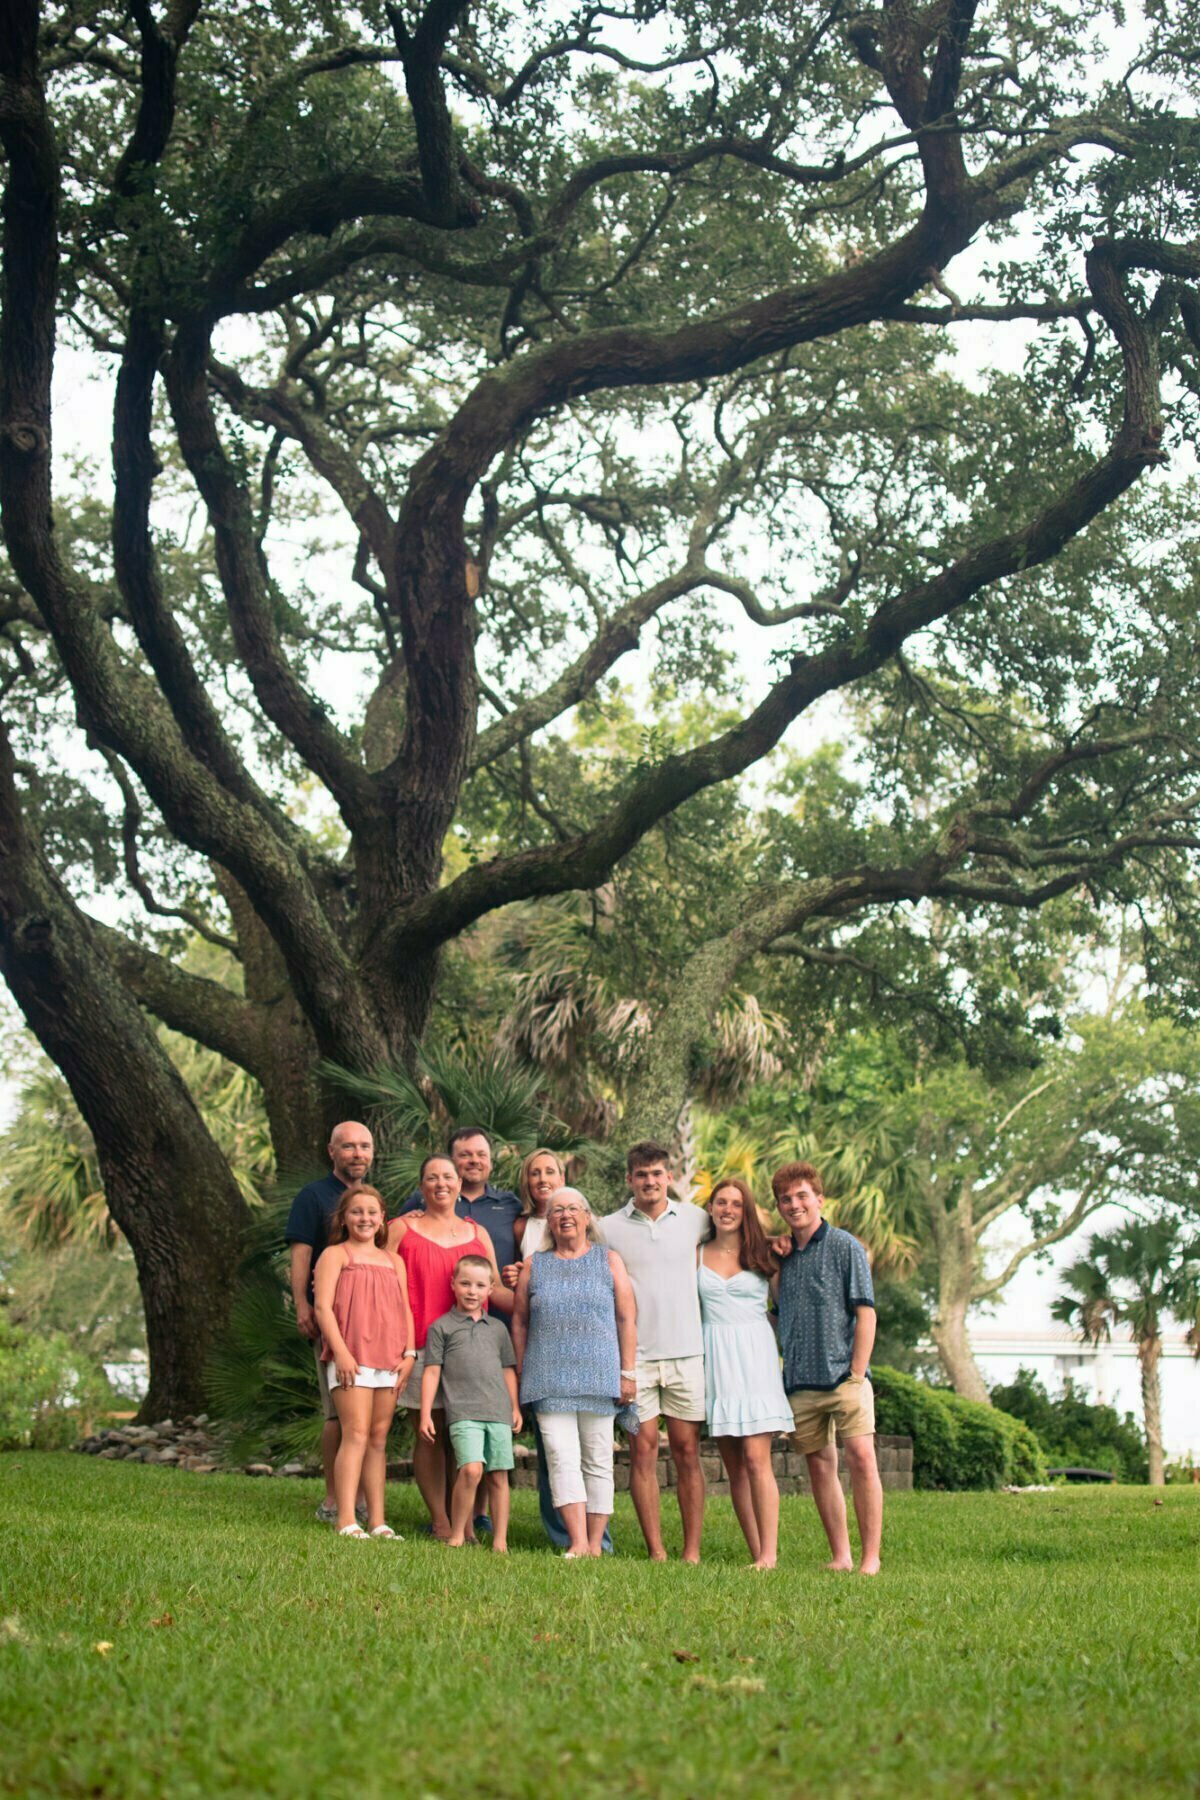 Sunset Beach, NC generational extended family portrait photography session under oak trees.